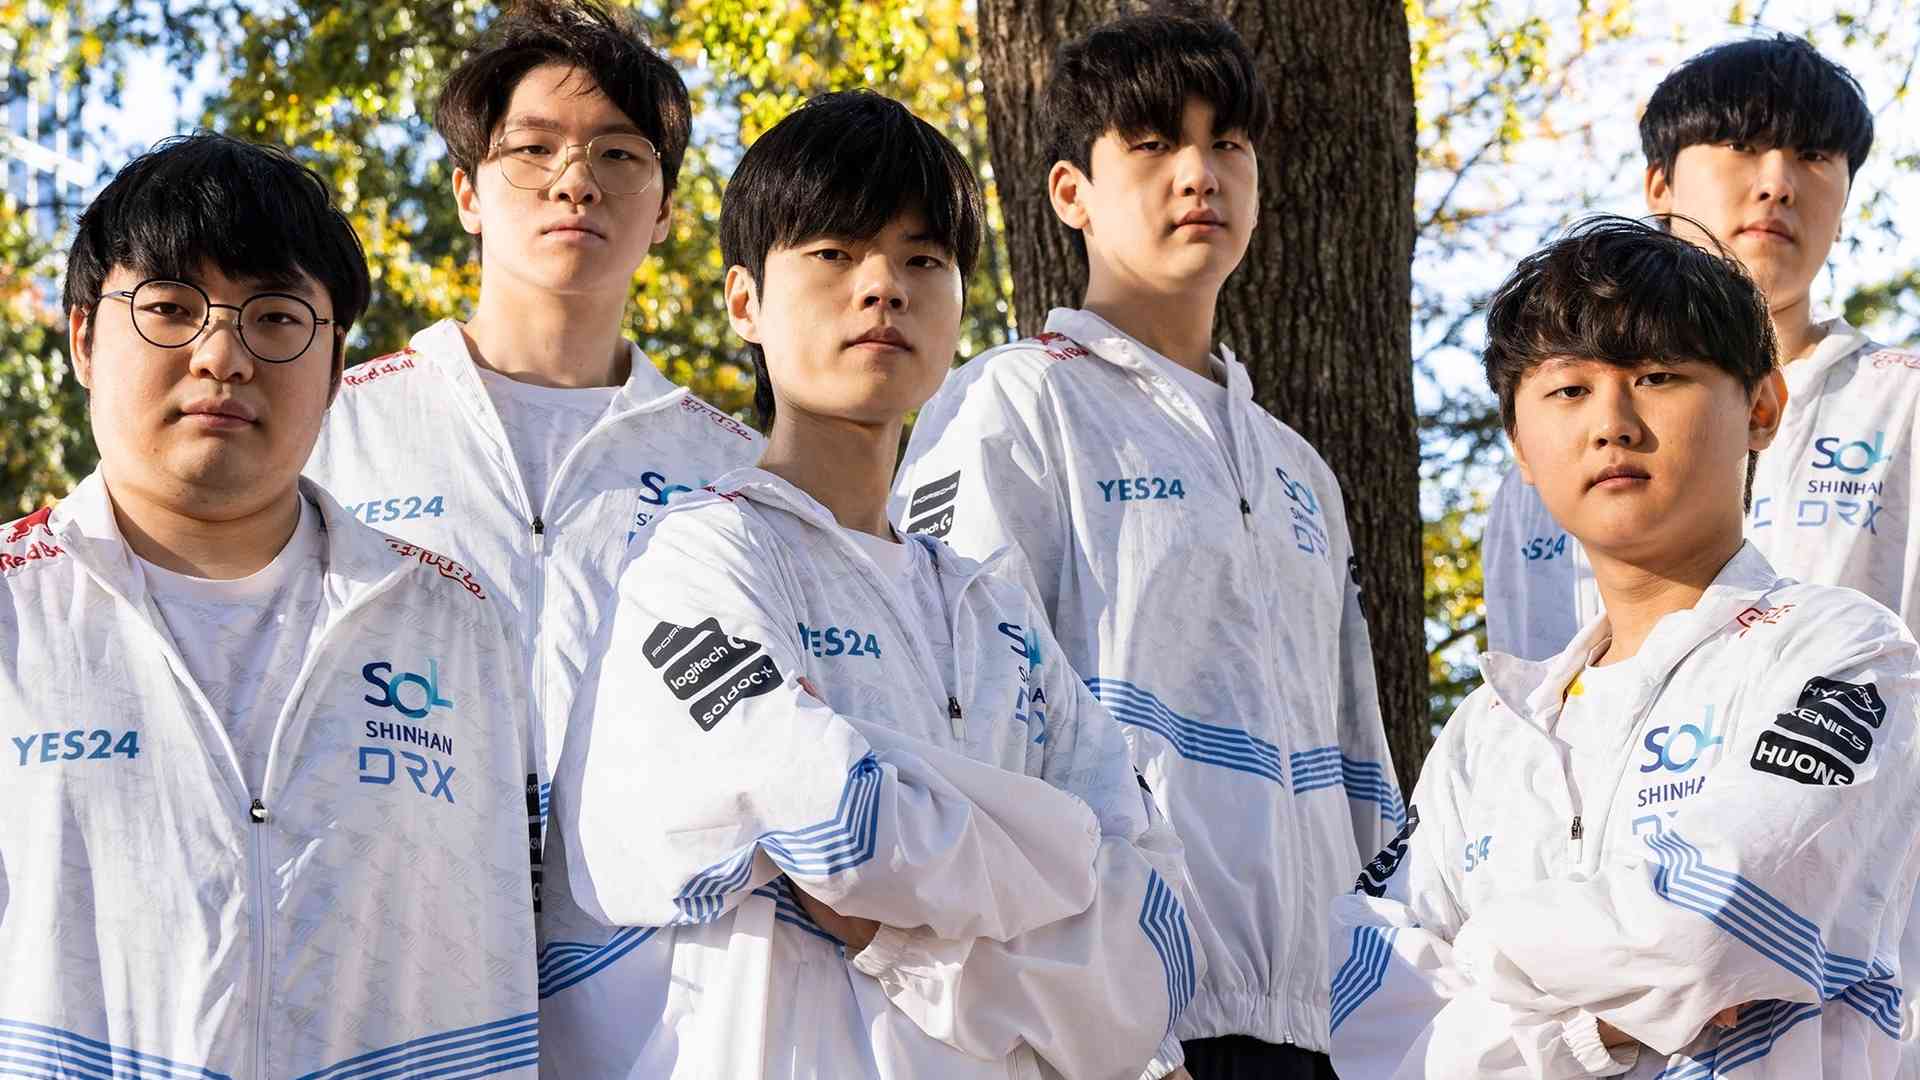 Korean fans initially doubted LCK teams could win Worlds